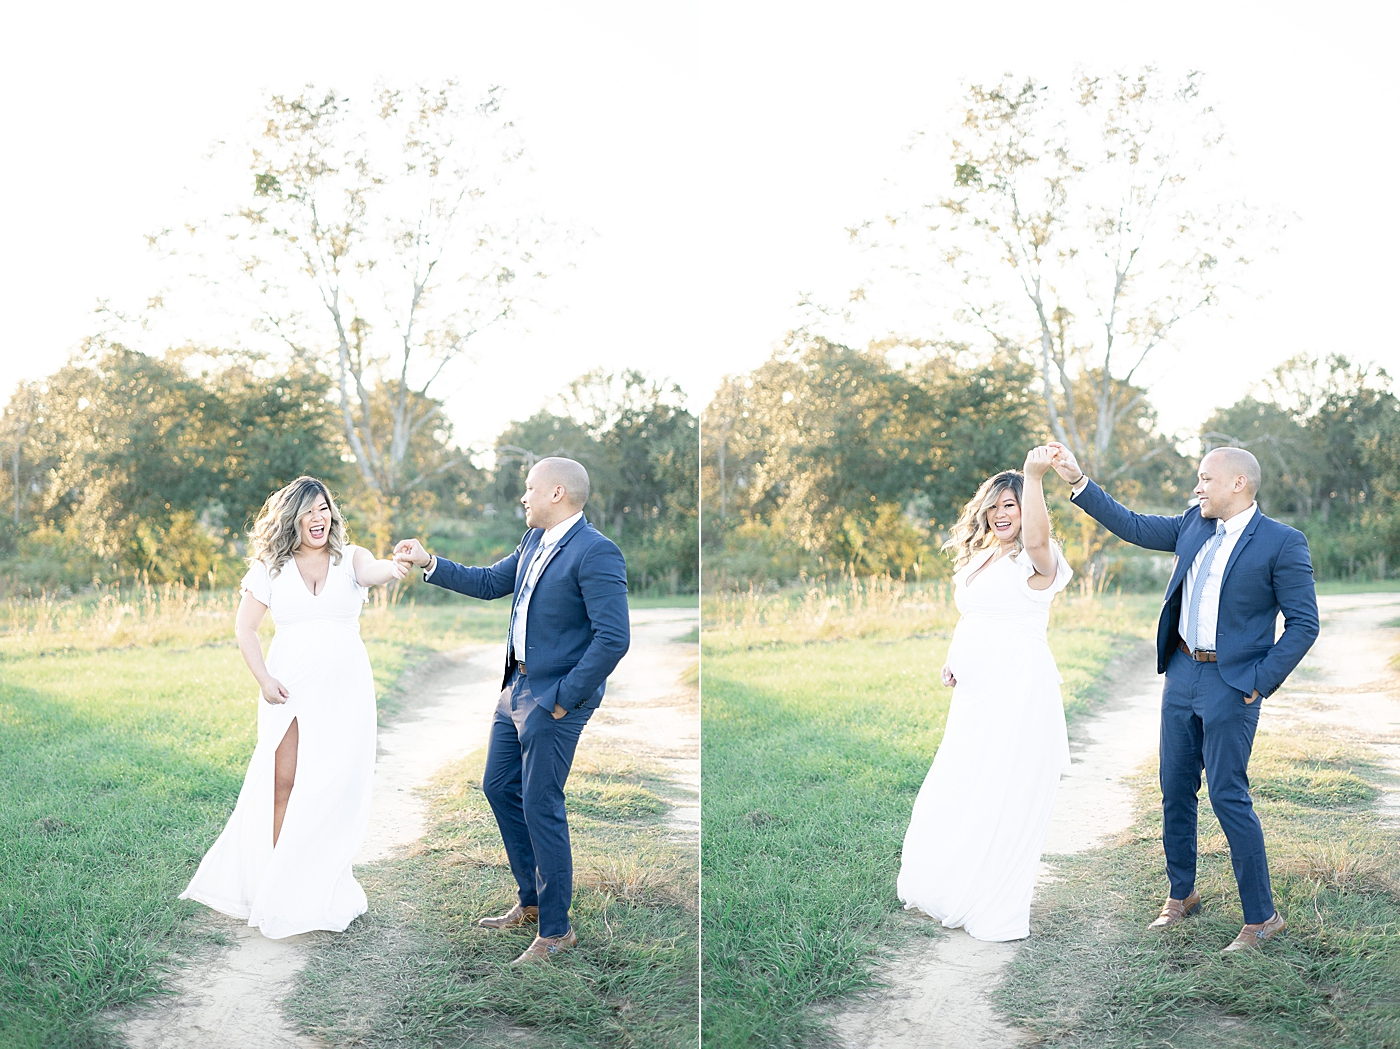 Mom and dad to be dancing on a dirt path | Photo by Gulfport MS Maternity and Newborn Photographer Little Sunshine Photography 